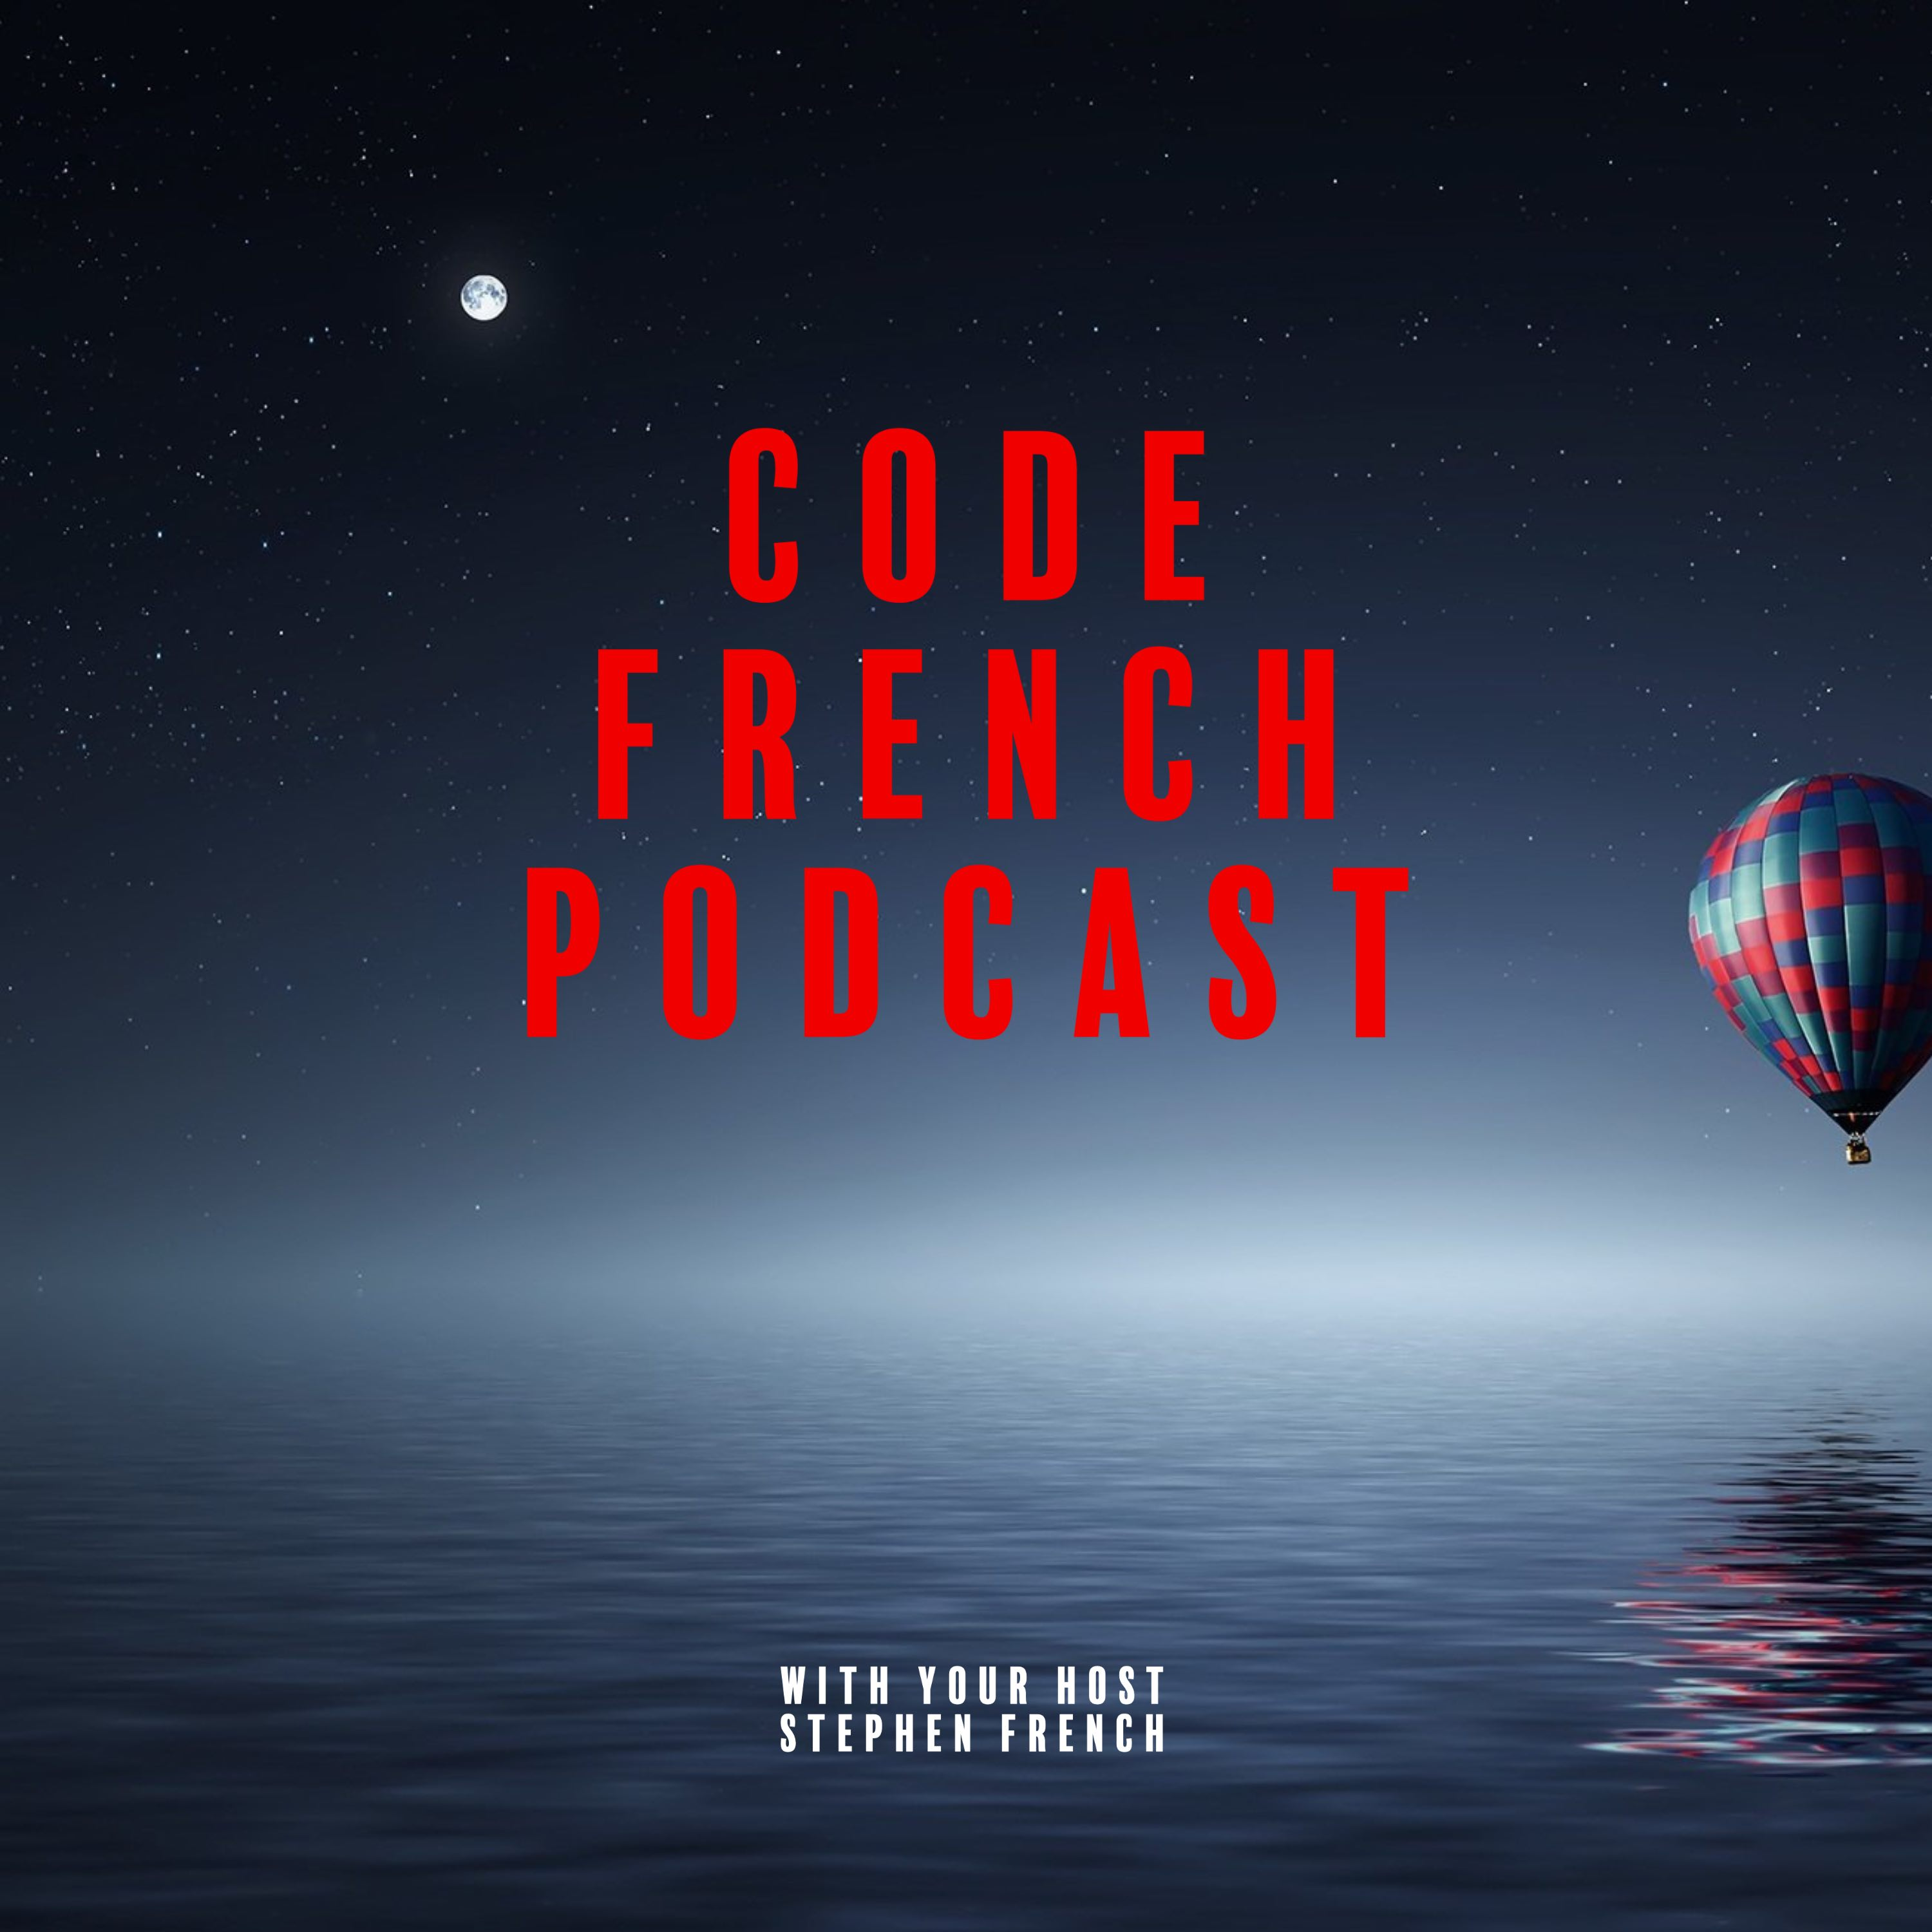 Code French Podcast